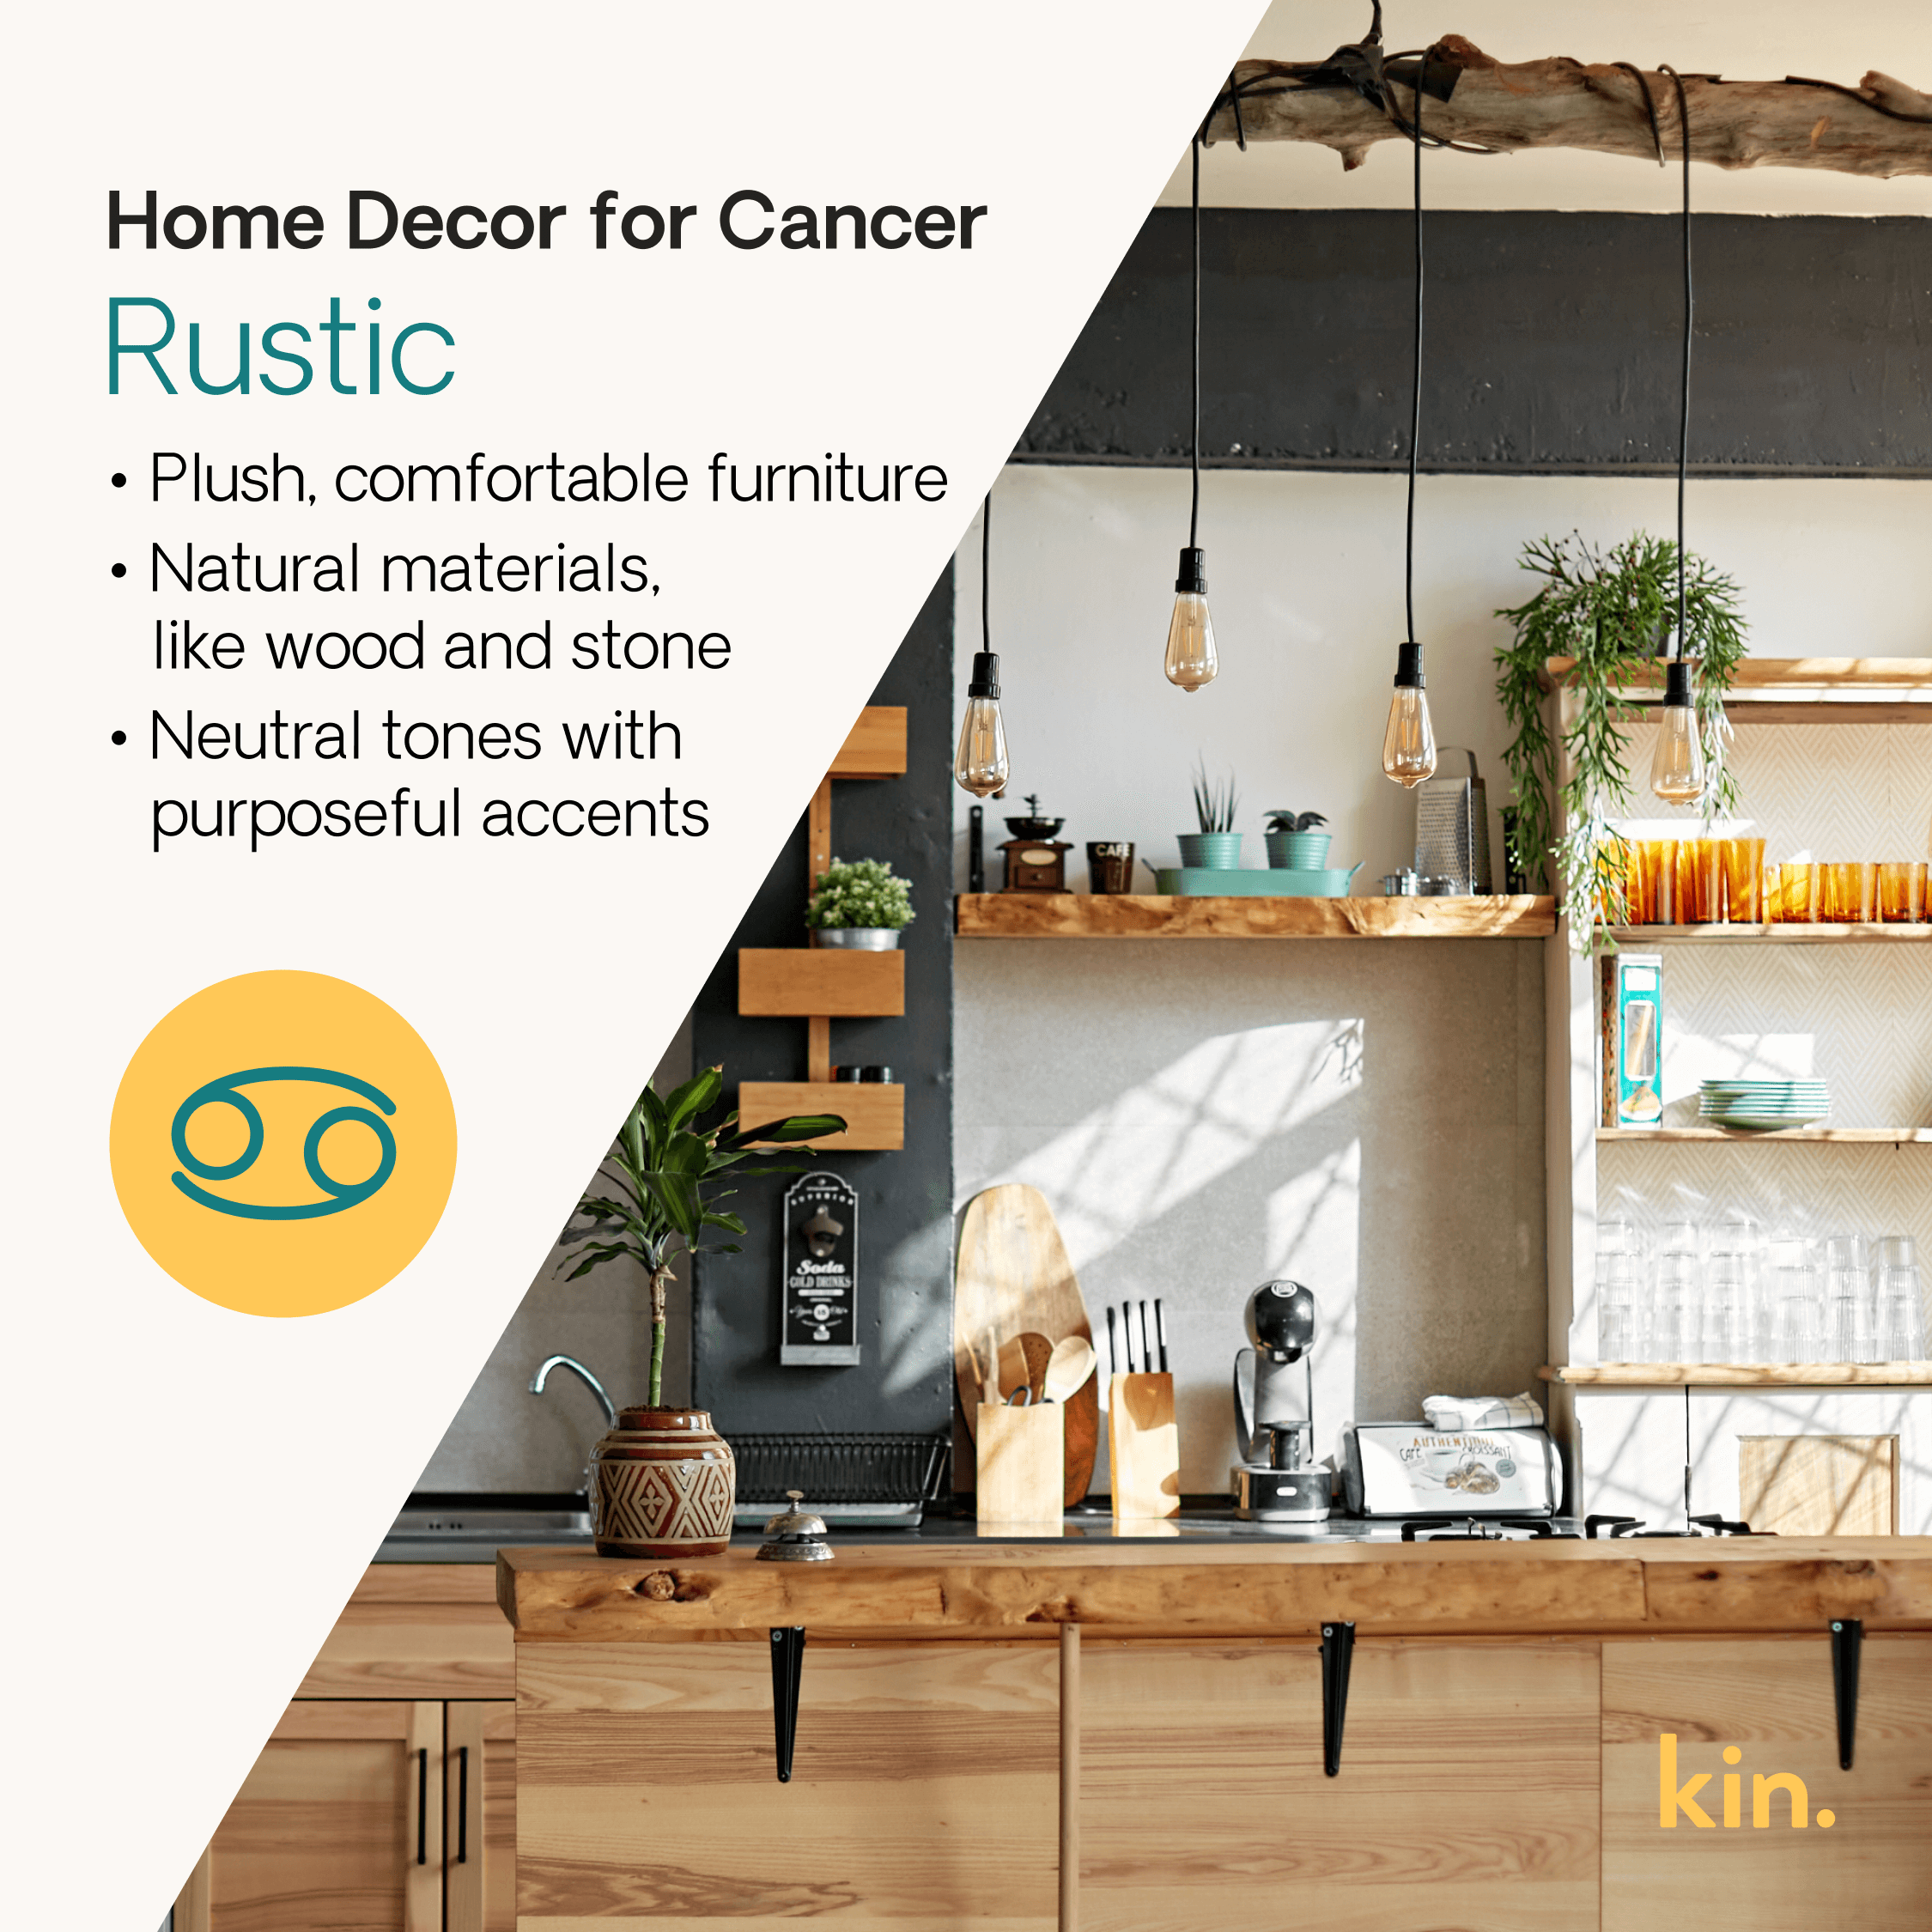 Home Decor for Cancer: Rustic Plush, comfortable furniture  Natural materials, like wood and stone Neutral tones with purposeful accents 